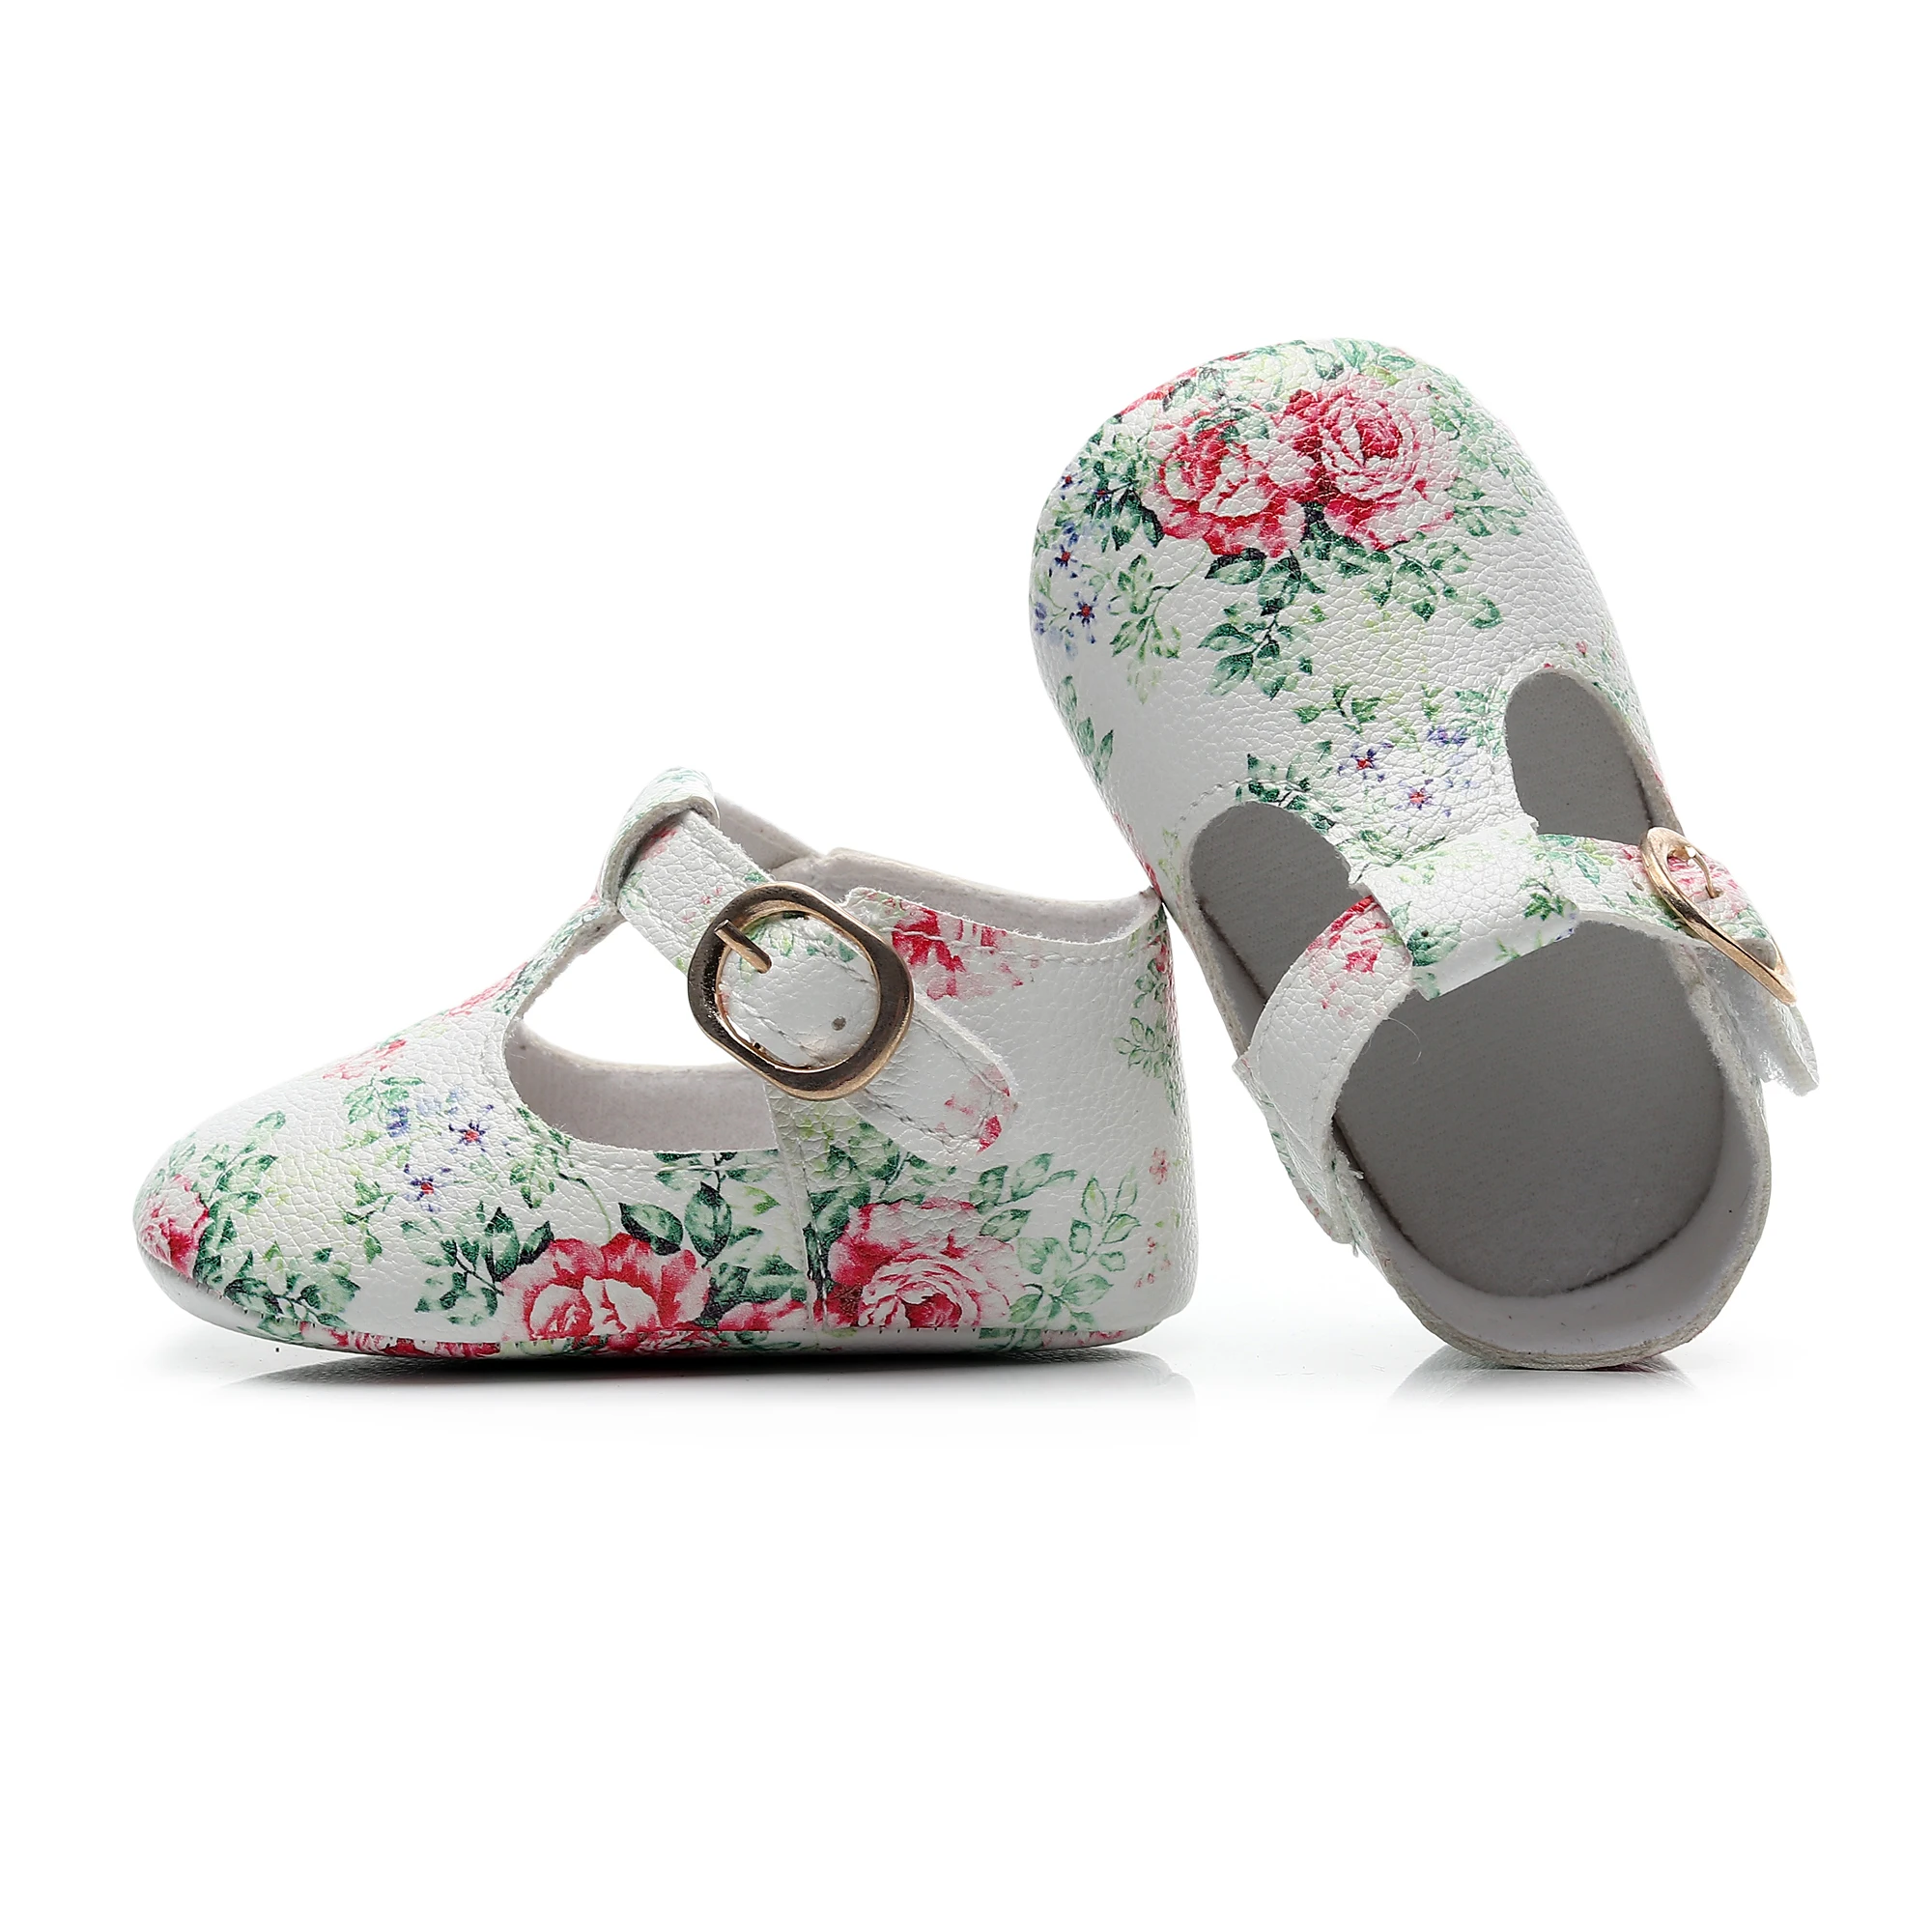 

Baby Shoes Soft Sole Pu Leather Print Floral T-bar Mary Jane Toddler Baby Moccasins Kids Princess Dress Shoes Footwear